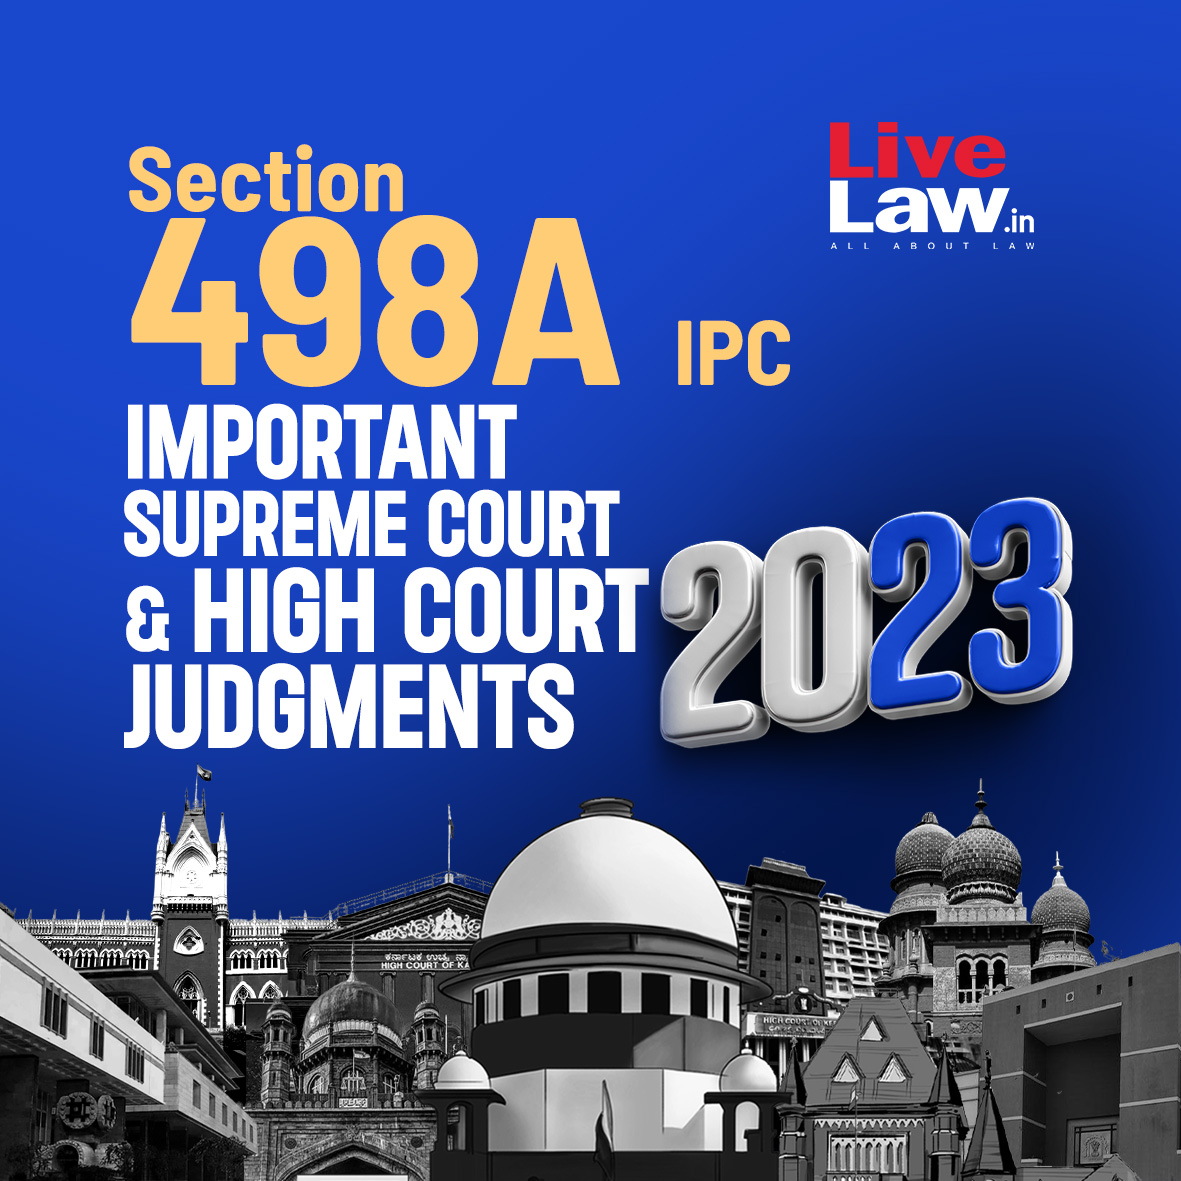 Section 498A IPC- Important Supreme Court & High Court Judgments of 2023
Read more: t.ly/kXPtw
#SupremeCourtOfIndia #HighCourts #Section498A #Year2023 #LiveLaw